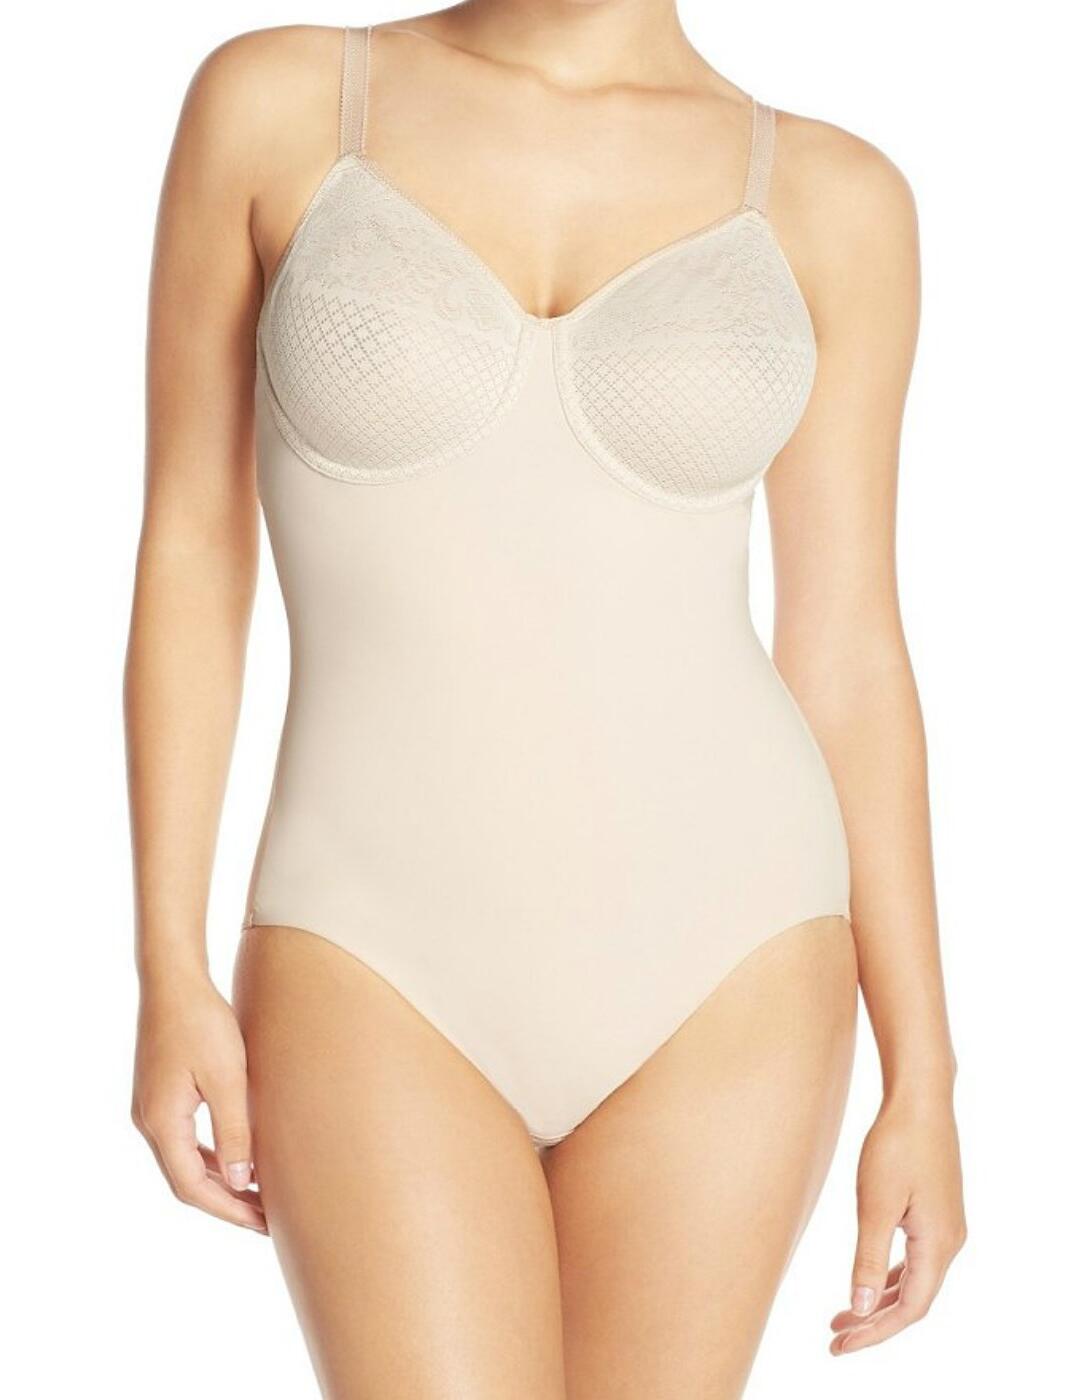 801210 Wacoal Visual Effects Body Briefer - 801210 Sand